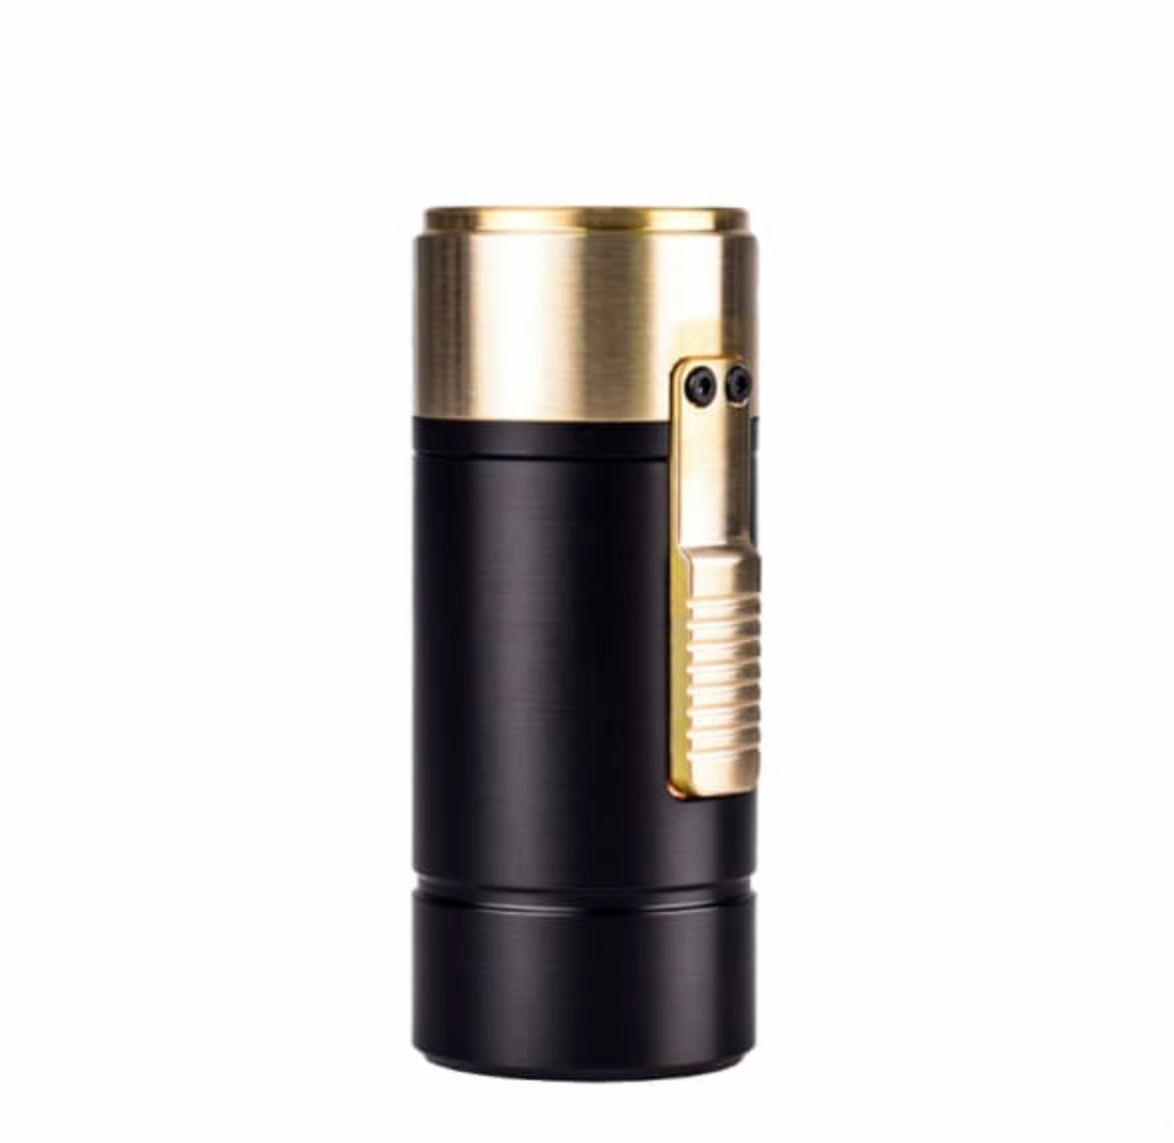 Suiside Tube Mod By Suicide Mods Brass top UK